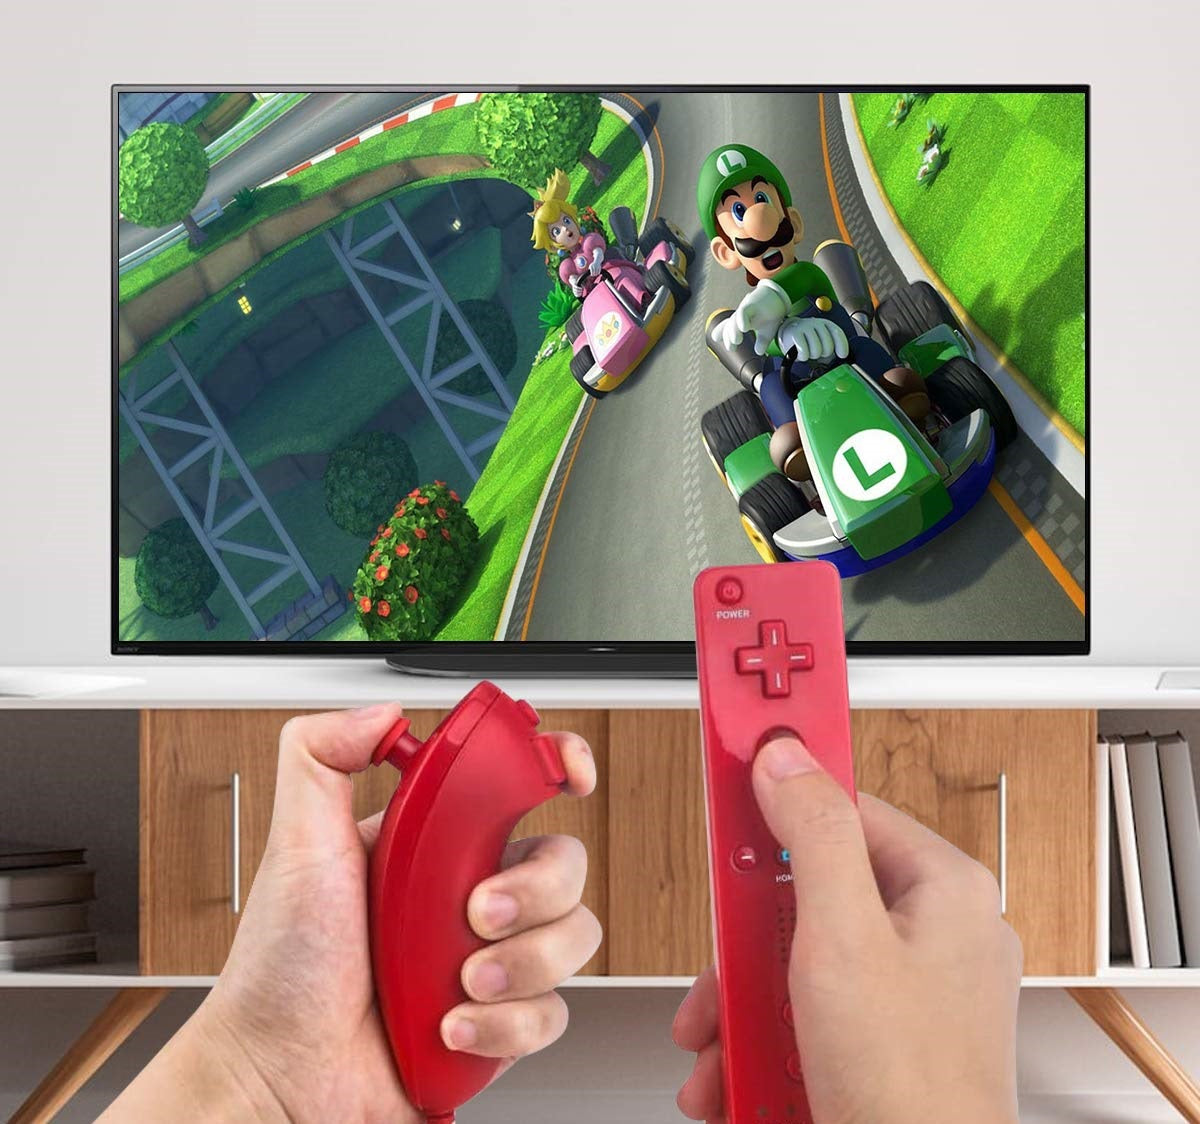 Replacement Remote Controller with Nunchuk for Wii